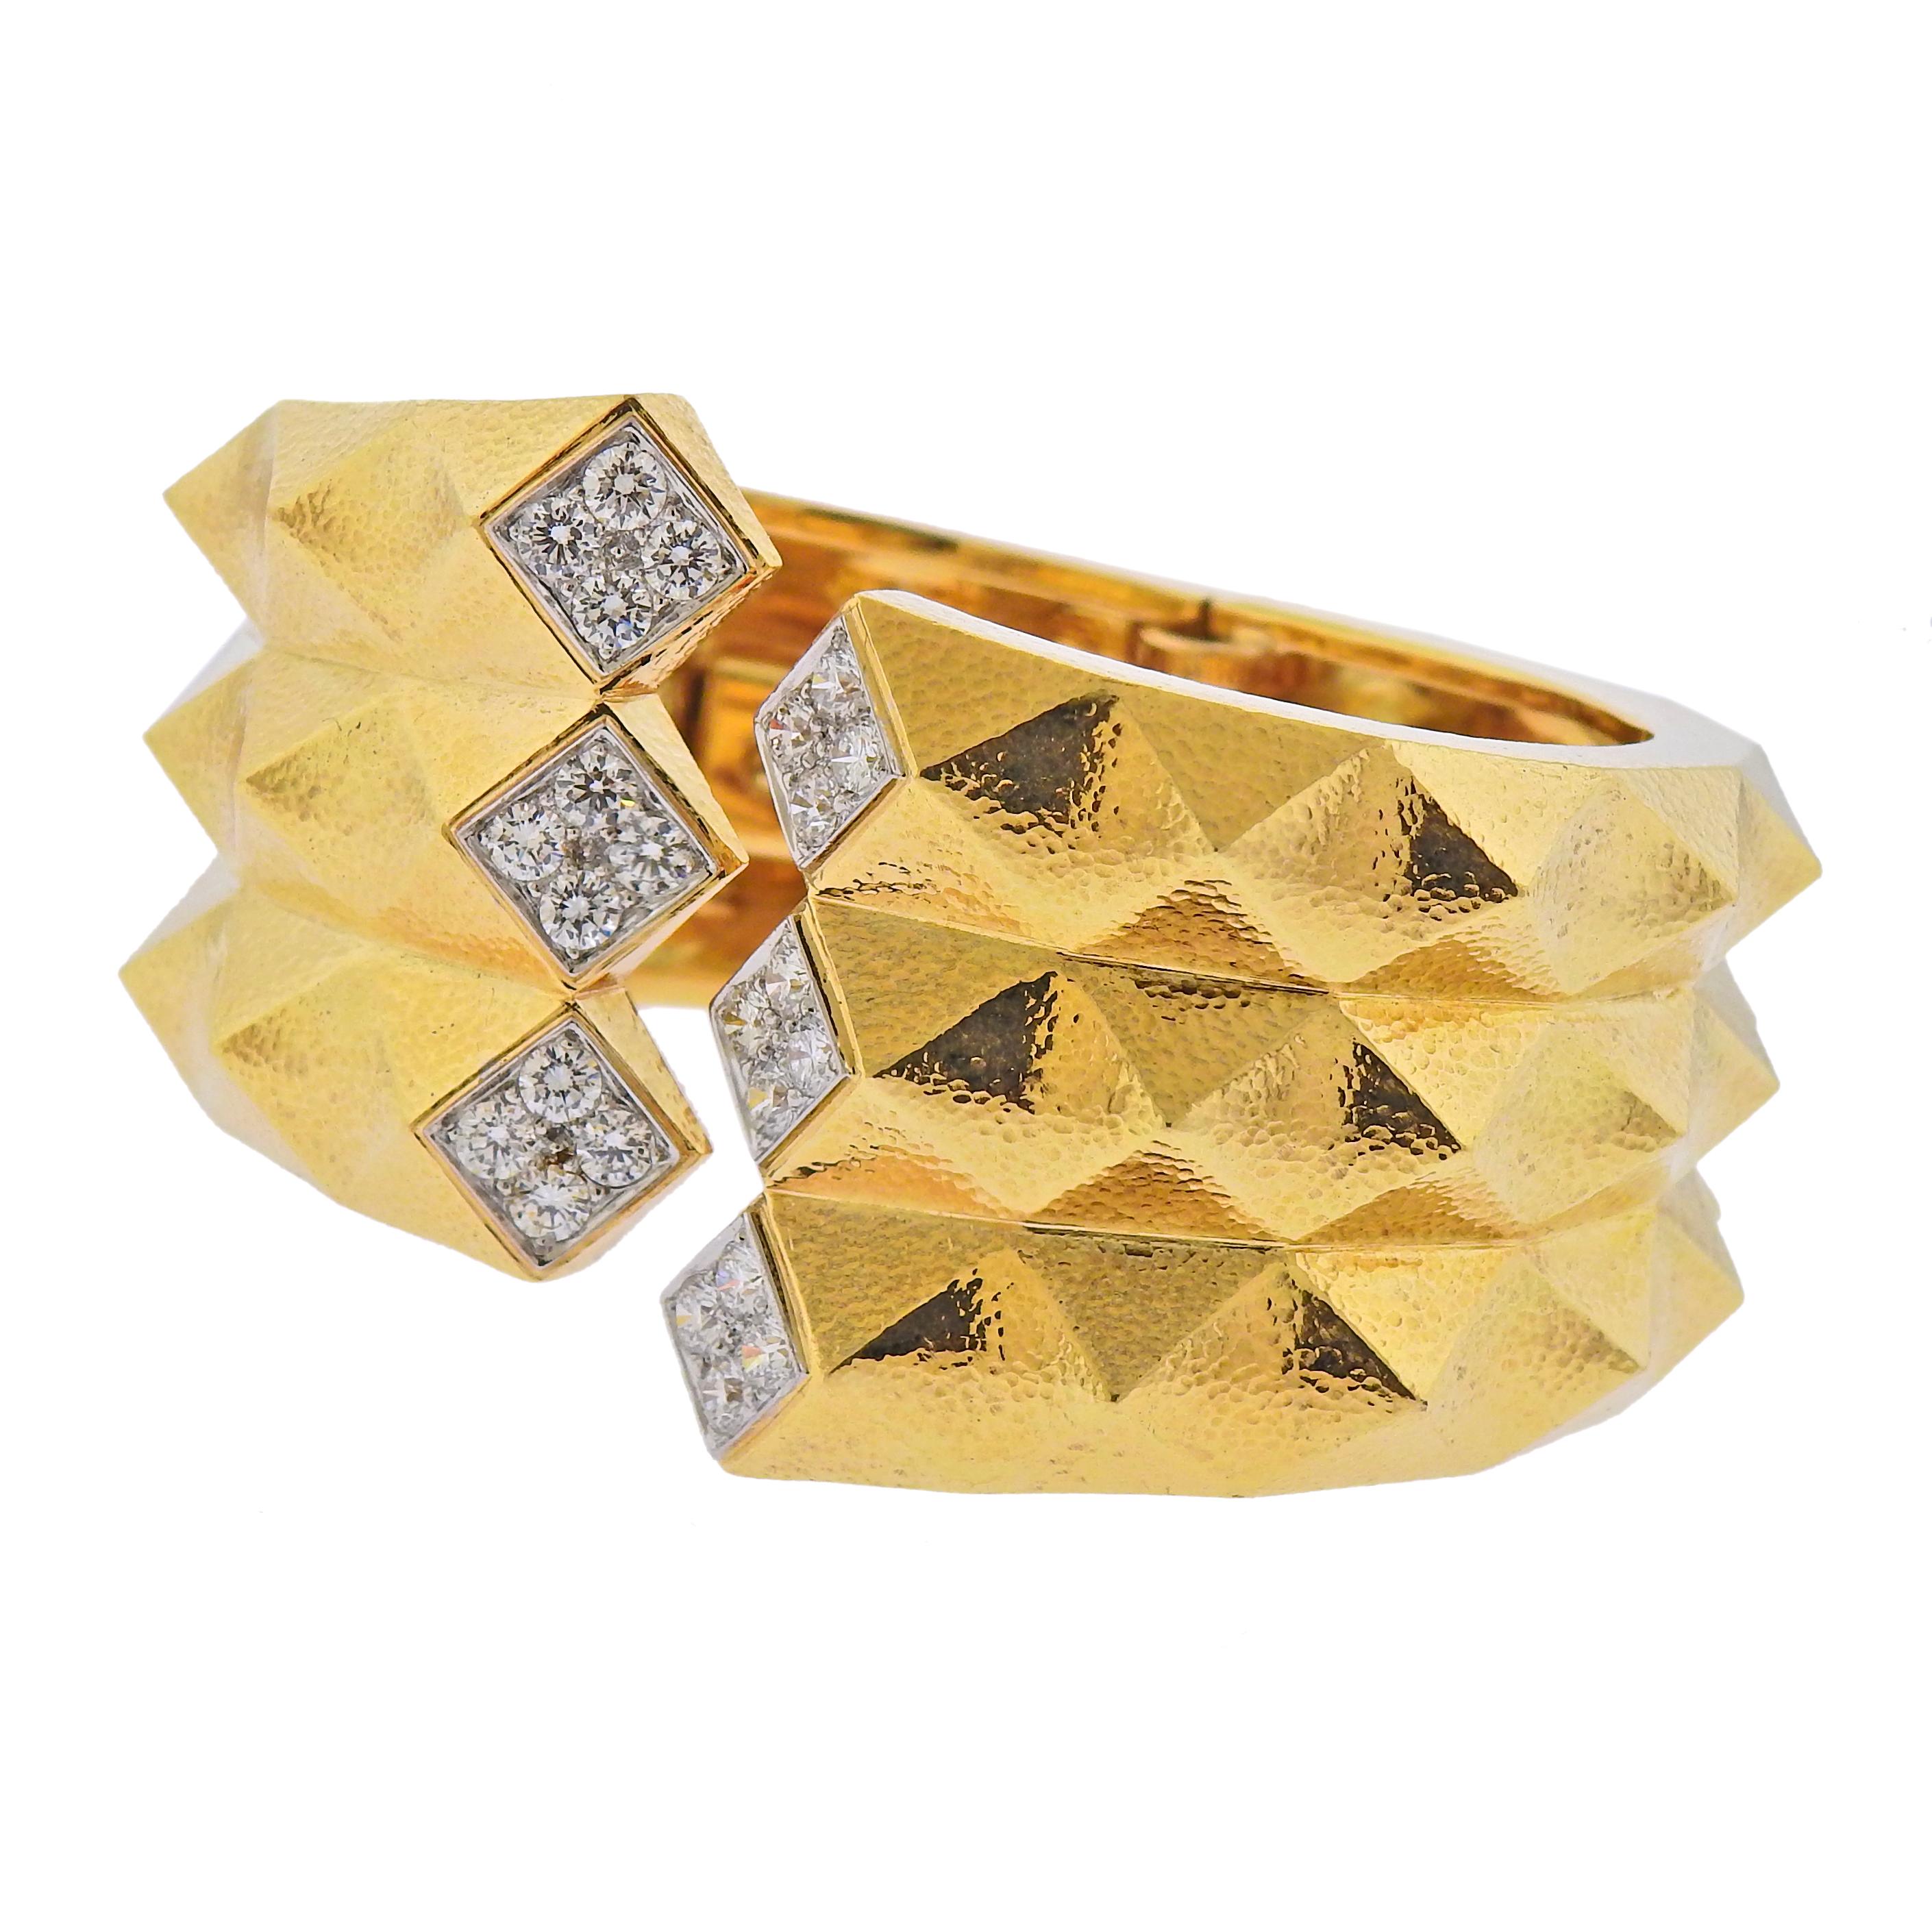 18k hammered gold and platinum Origami cuff bracelet by David Webb, with approx. 2.40cts in H/VS-Si1 diamonds. Cuff will fit approx. 6.75